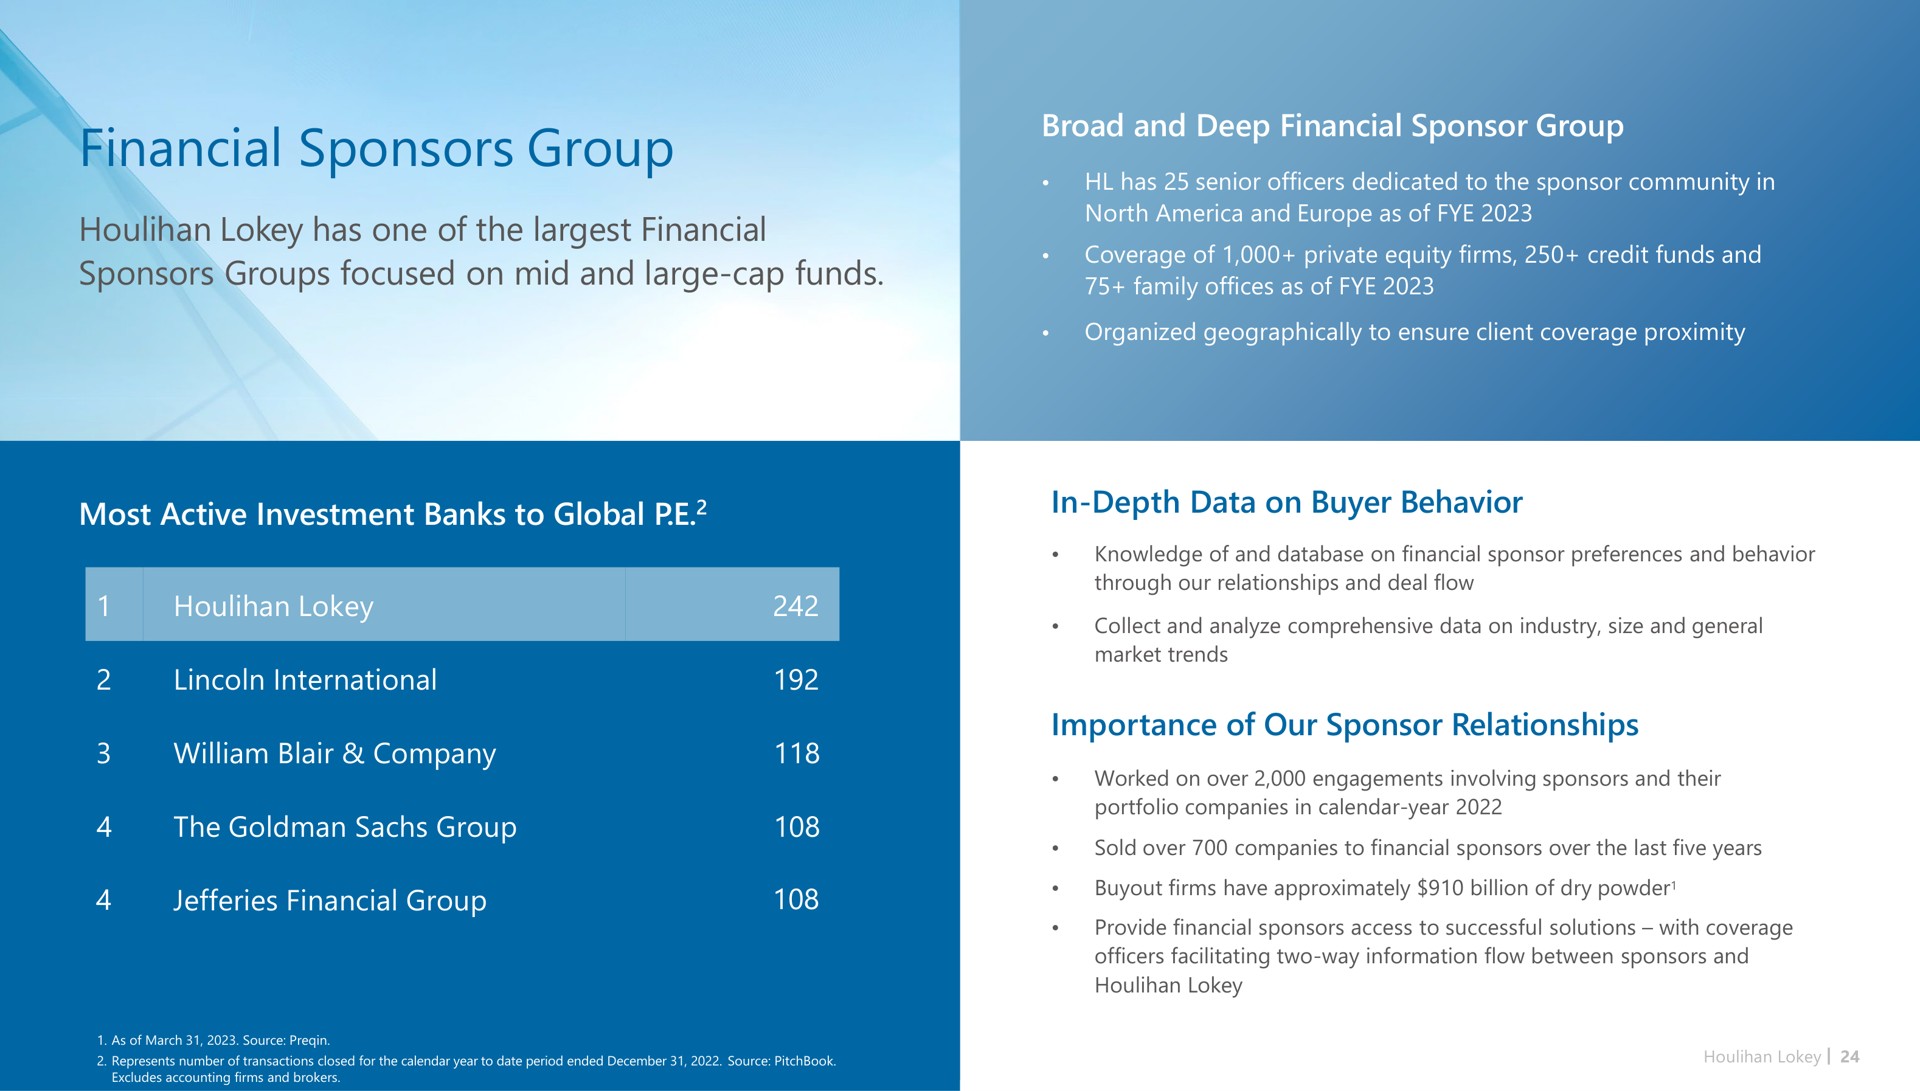 financial sponsors group has one of the financial sponsors groups focused on mid and large cap funds | Houlihan Lokey